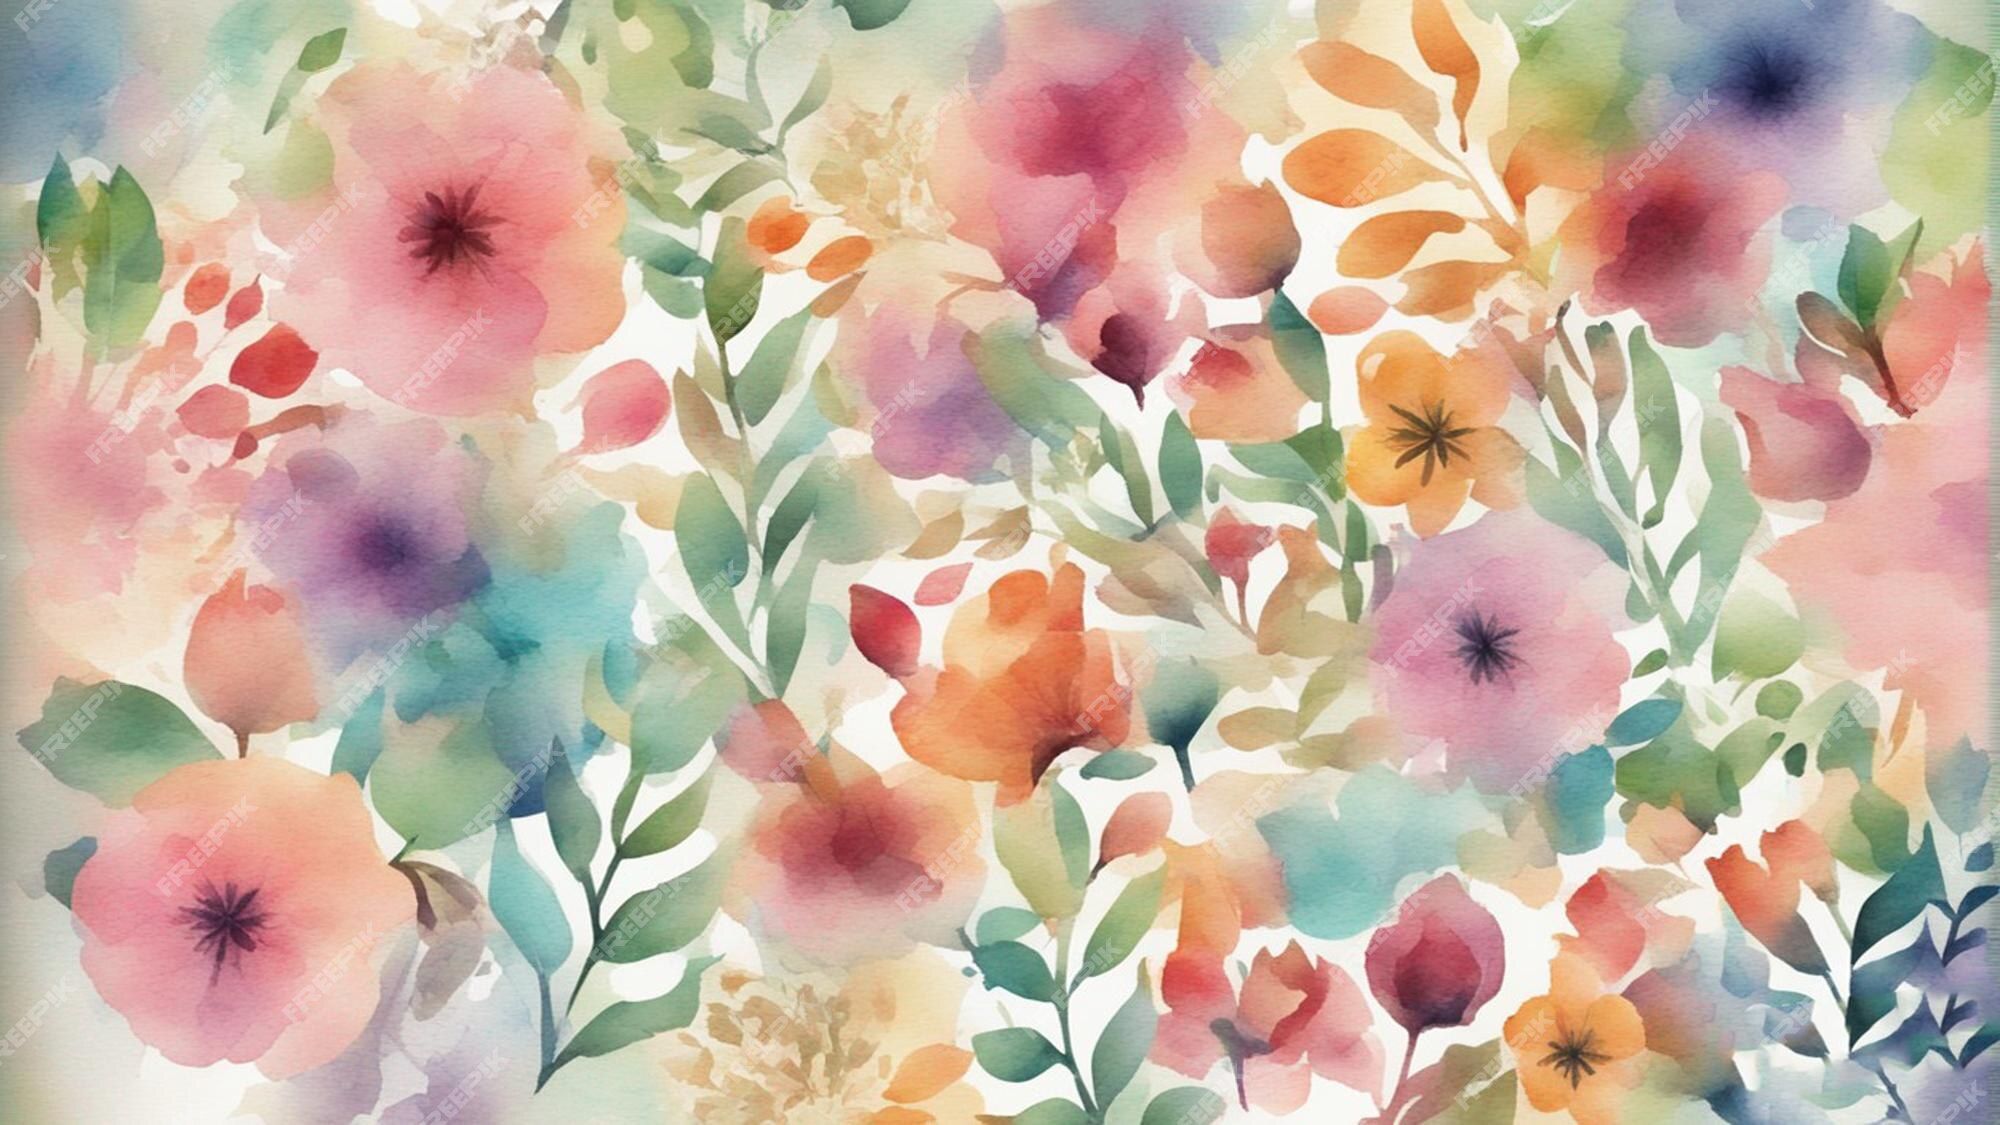 Watercolor flowers background. Hand painted illustration. Watercolor painting. - Watercolor